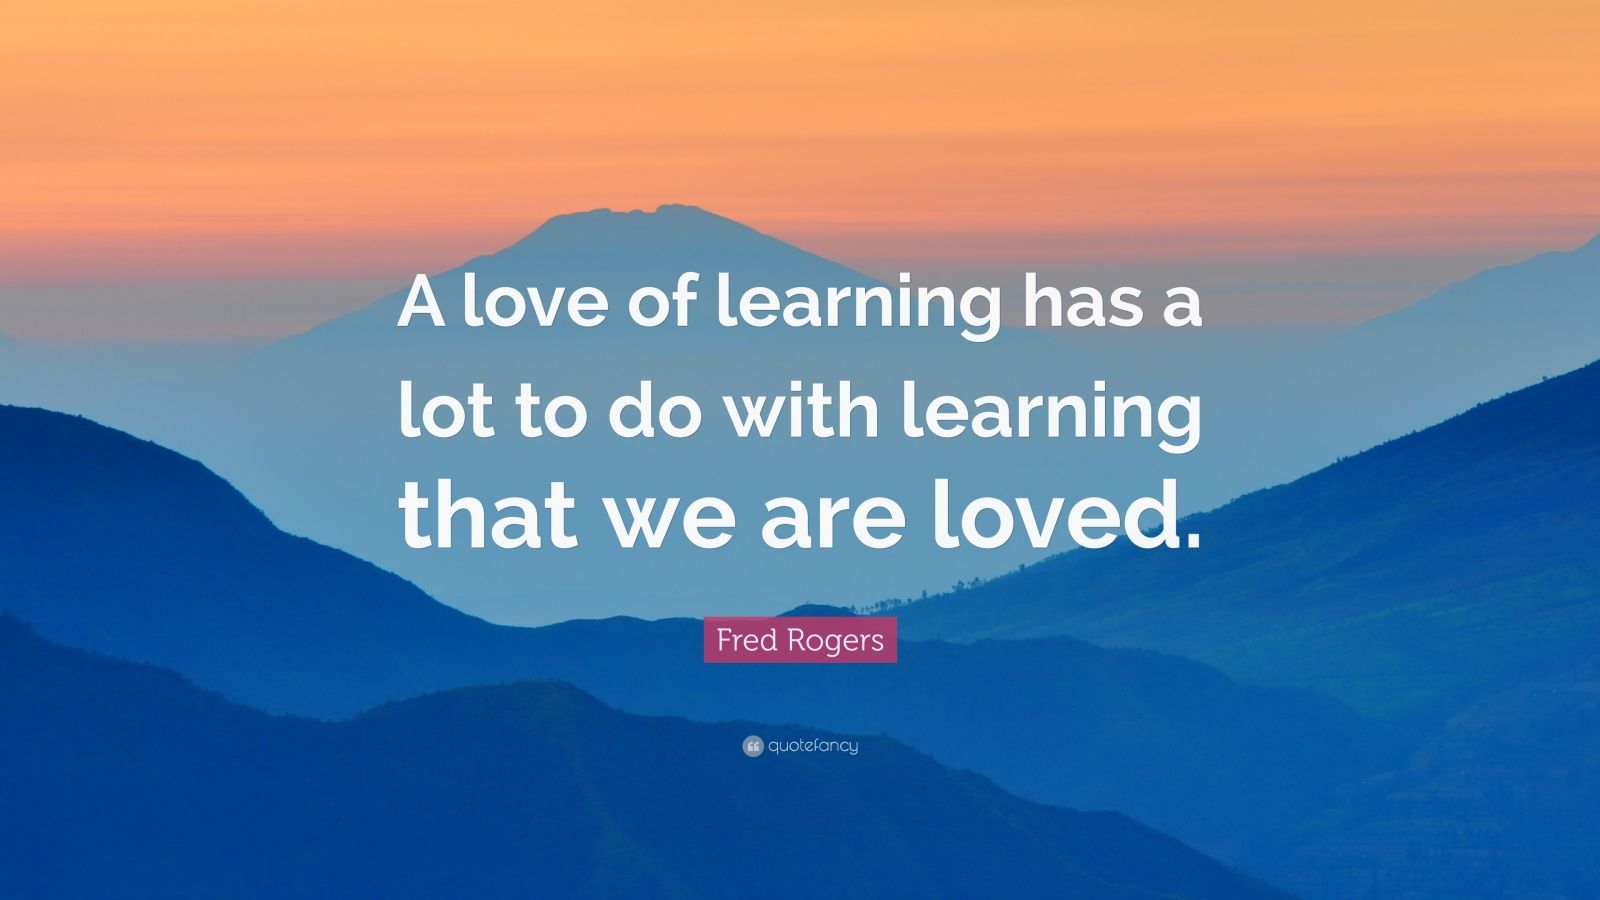 Fred Rogers Quote: “A love of learning has a lot to do with learning